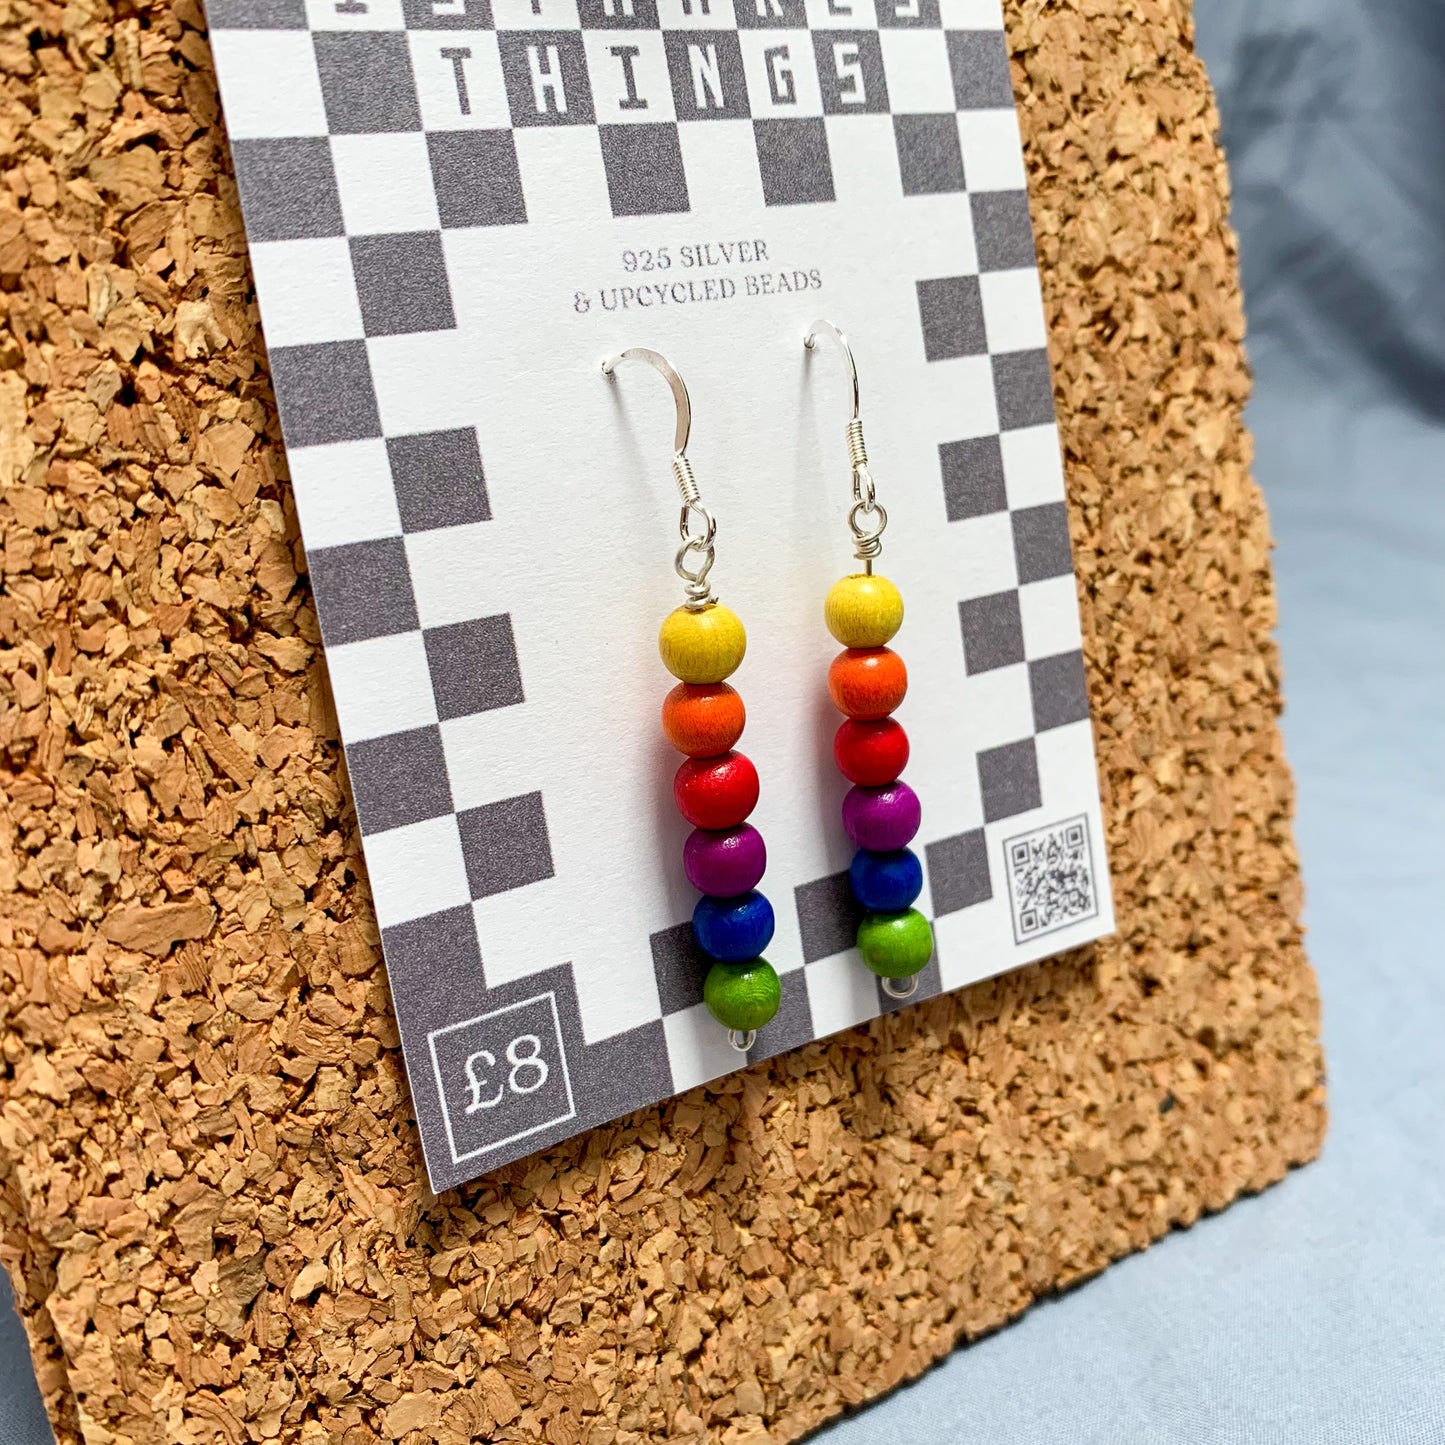 Rainbow bead earrings on a checkerboard backing pegged to a corkboard against a blue background